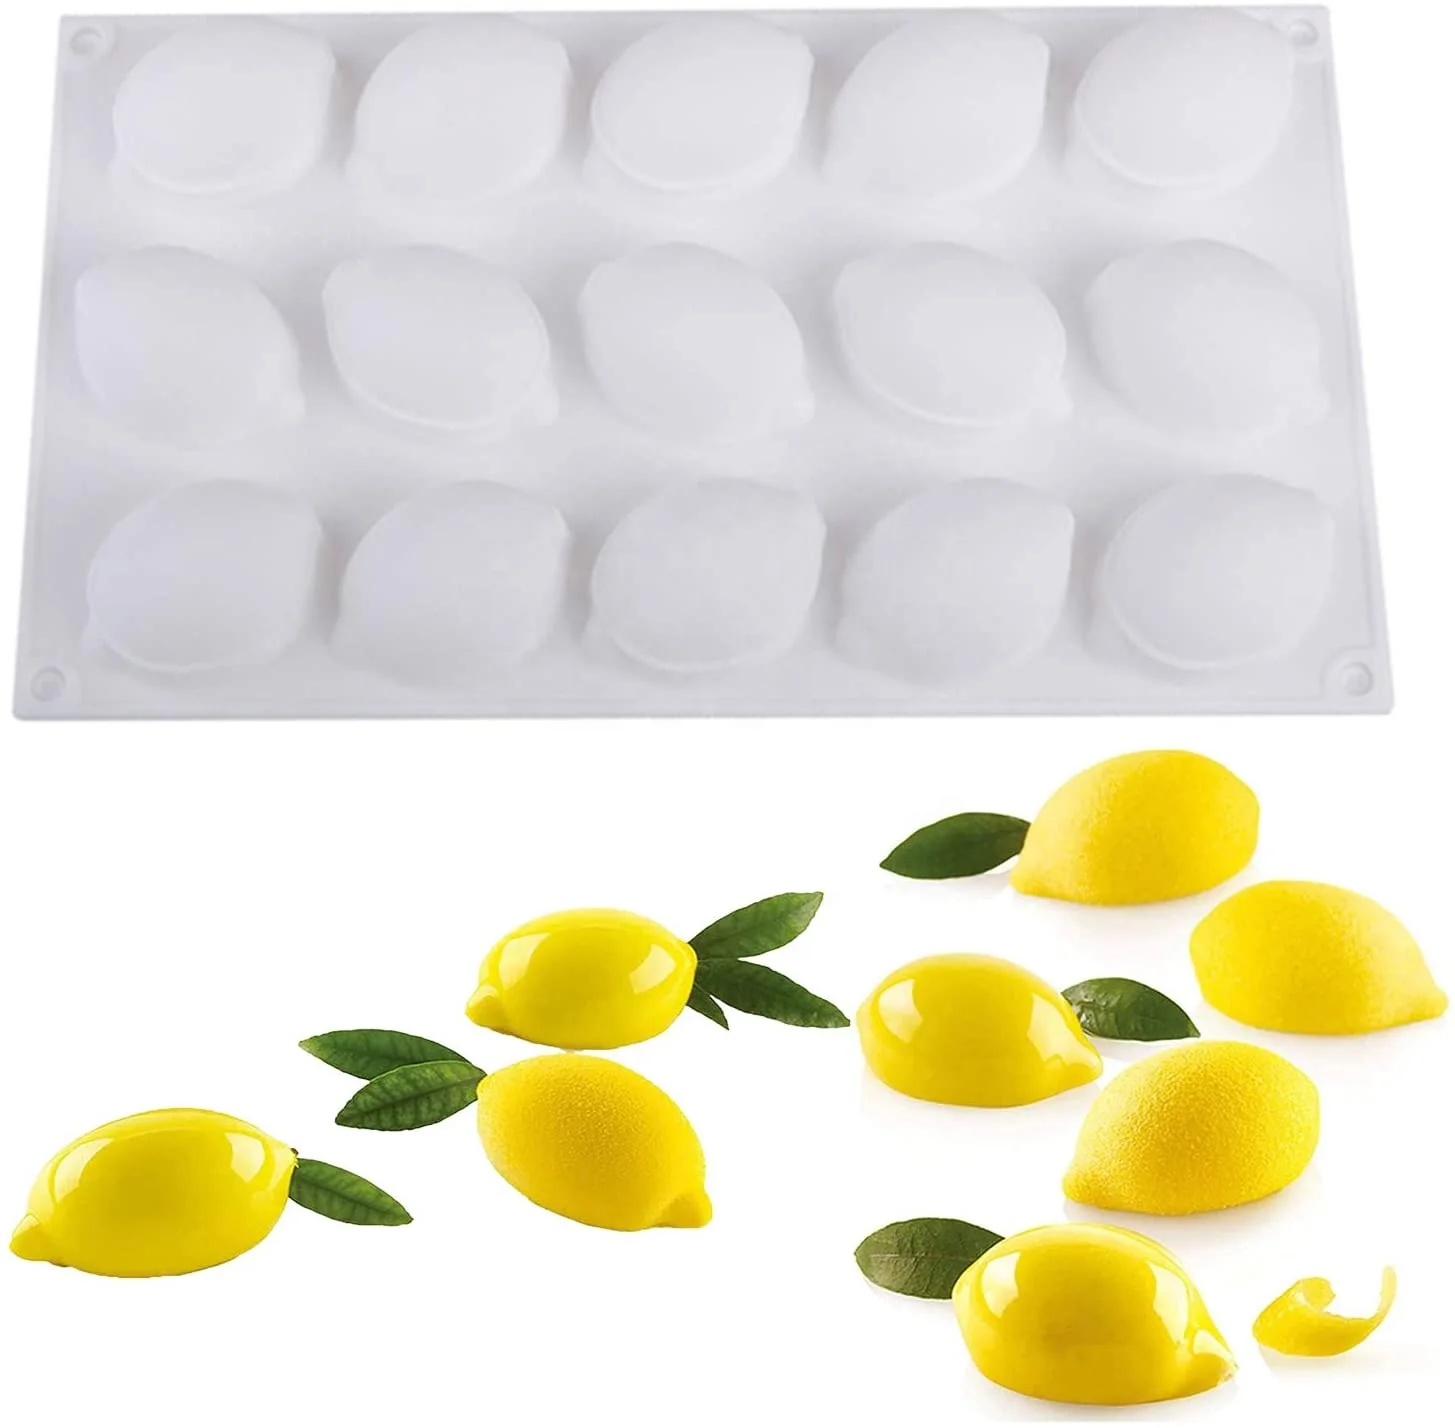 

15 Cavity Mini 3D Lemon Shape Silicone Mold for Baking Mousse Cake Candy Chocolate Dessert Pastry Cupcake Ice Cream Pudding, White